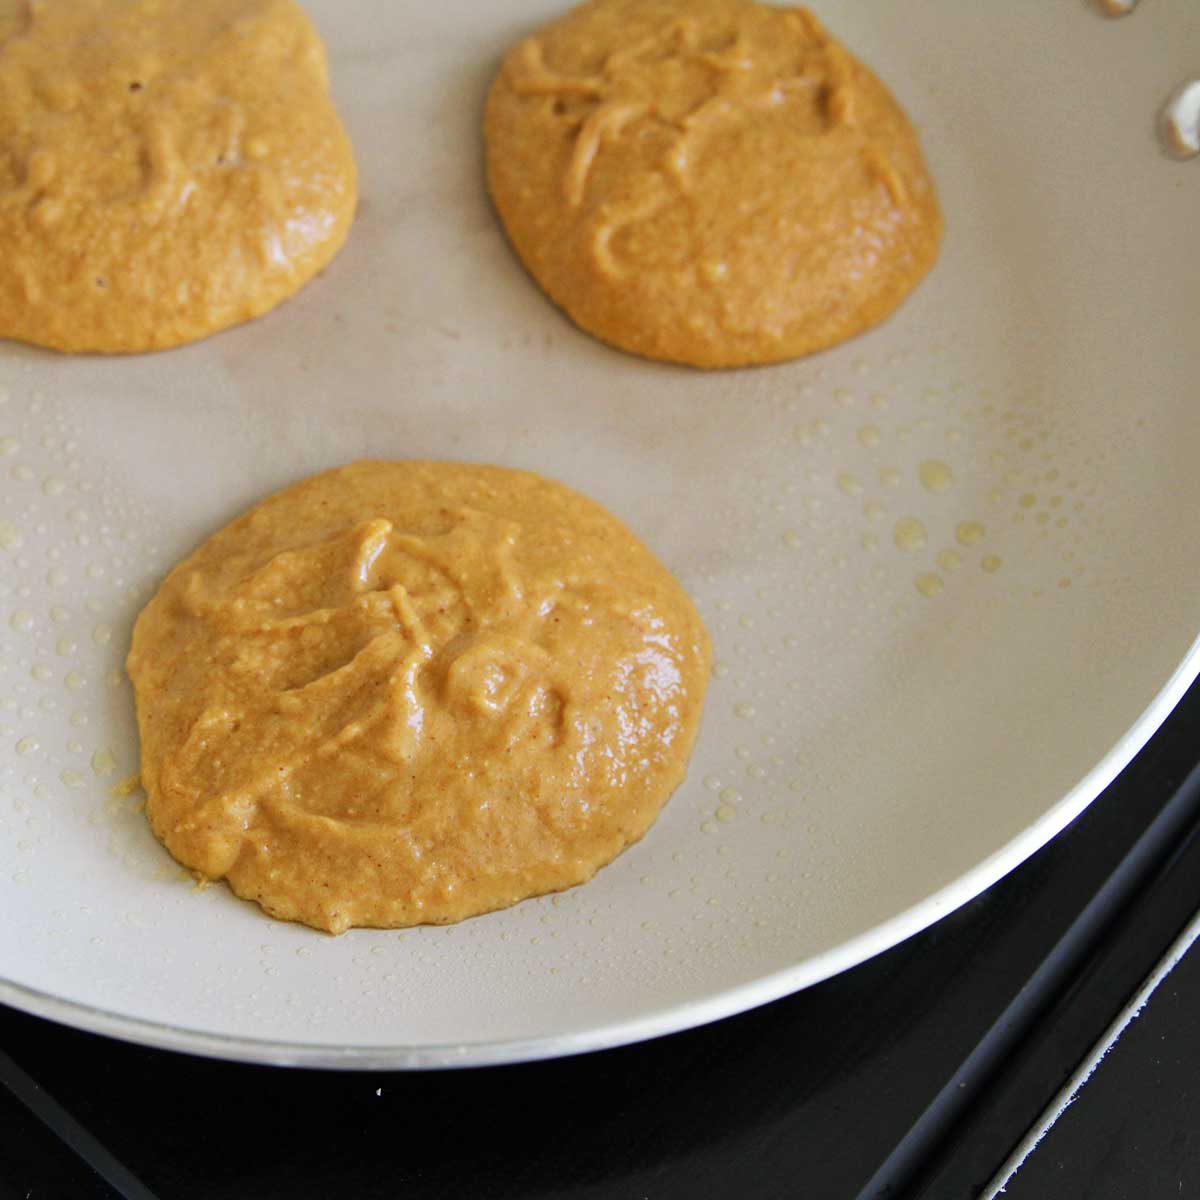 How to Make Healthy Powdered Peanut Butter Pancakes Using PB Fit or PB2 - Powdered Peanut Butter Pancakes